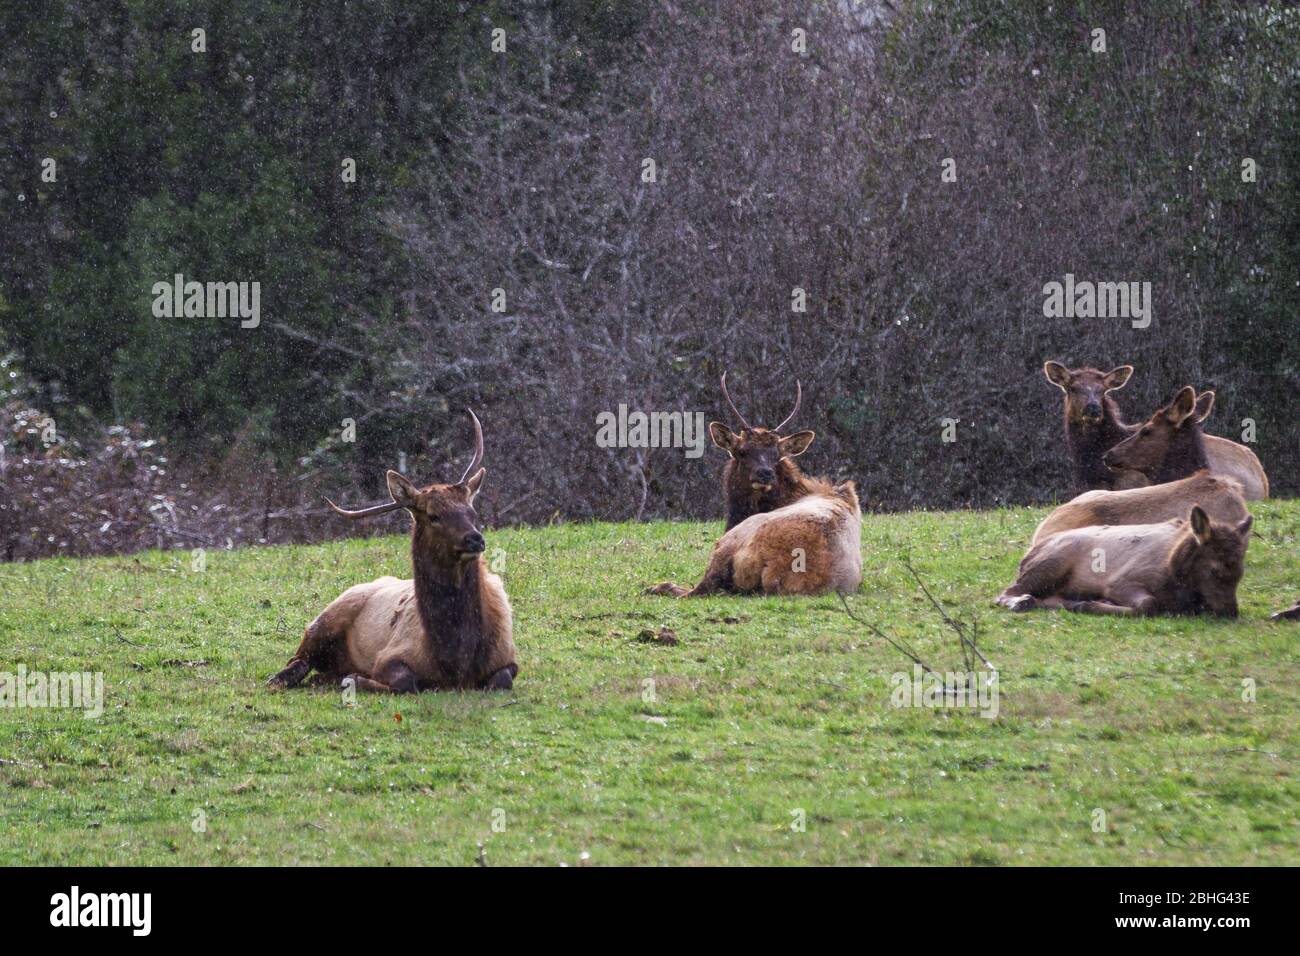 Herd of elk in the southern Oregon coast resting on a green grass pasture under light rain typical of the mild winter weather Stock Photo